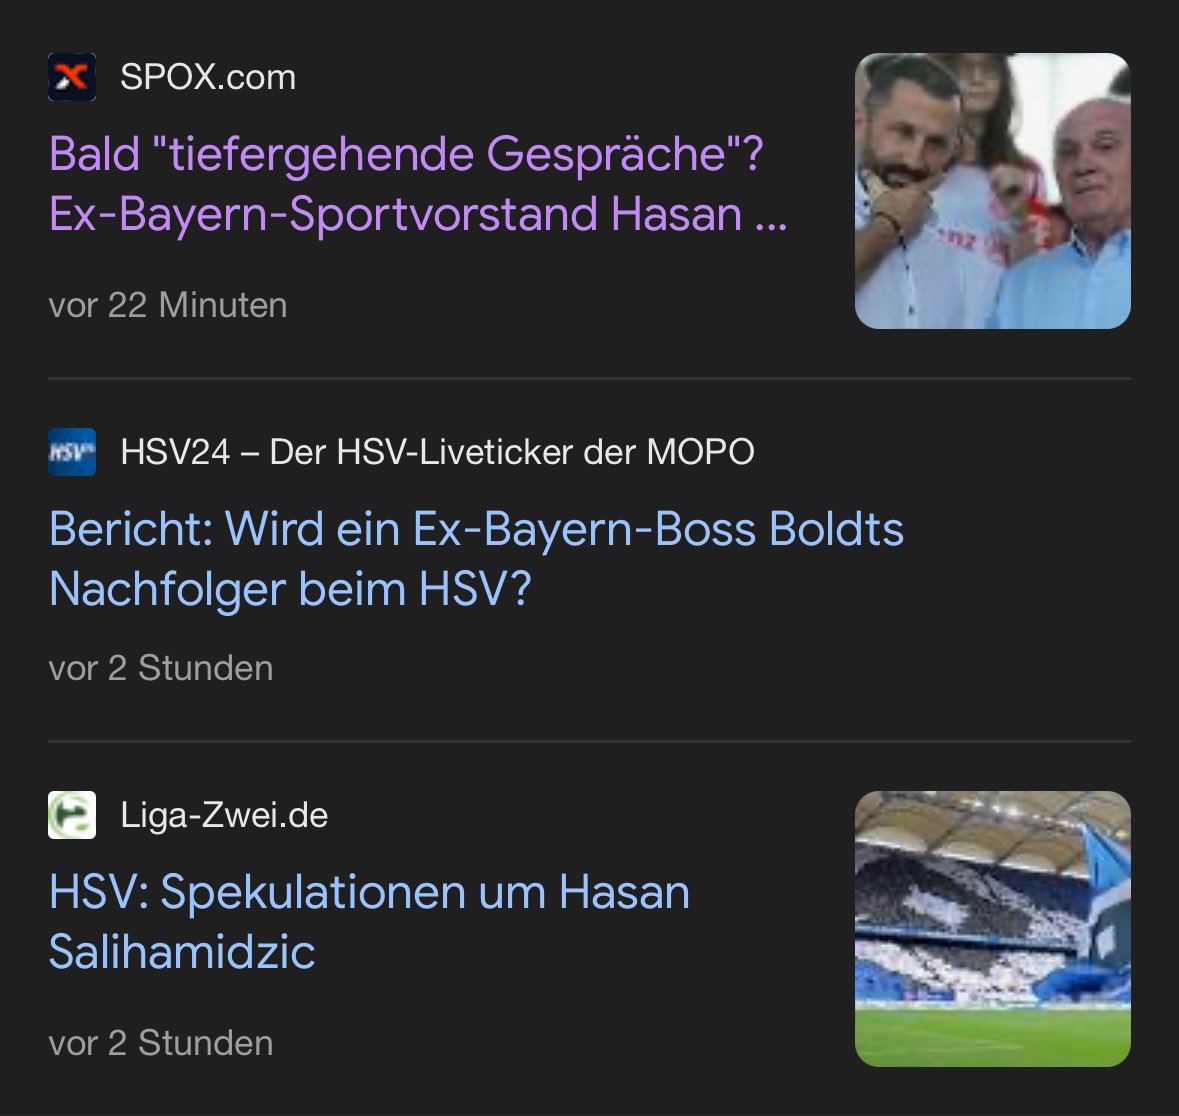 Weirdest news I woke up to this morning. Apparently we want to sign Brazzo as new HSV boss…I don‘t know what to think or believe man.